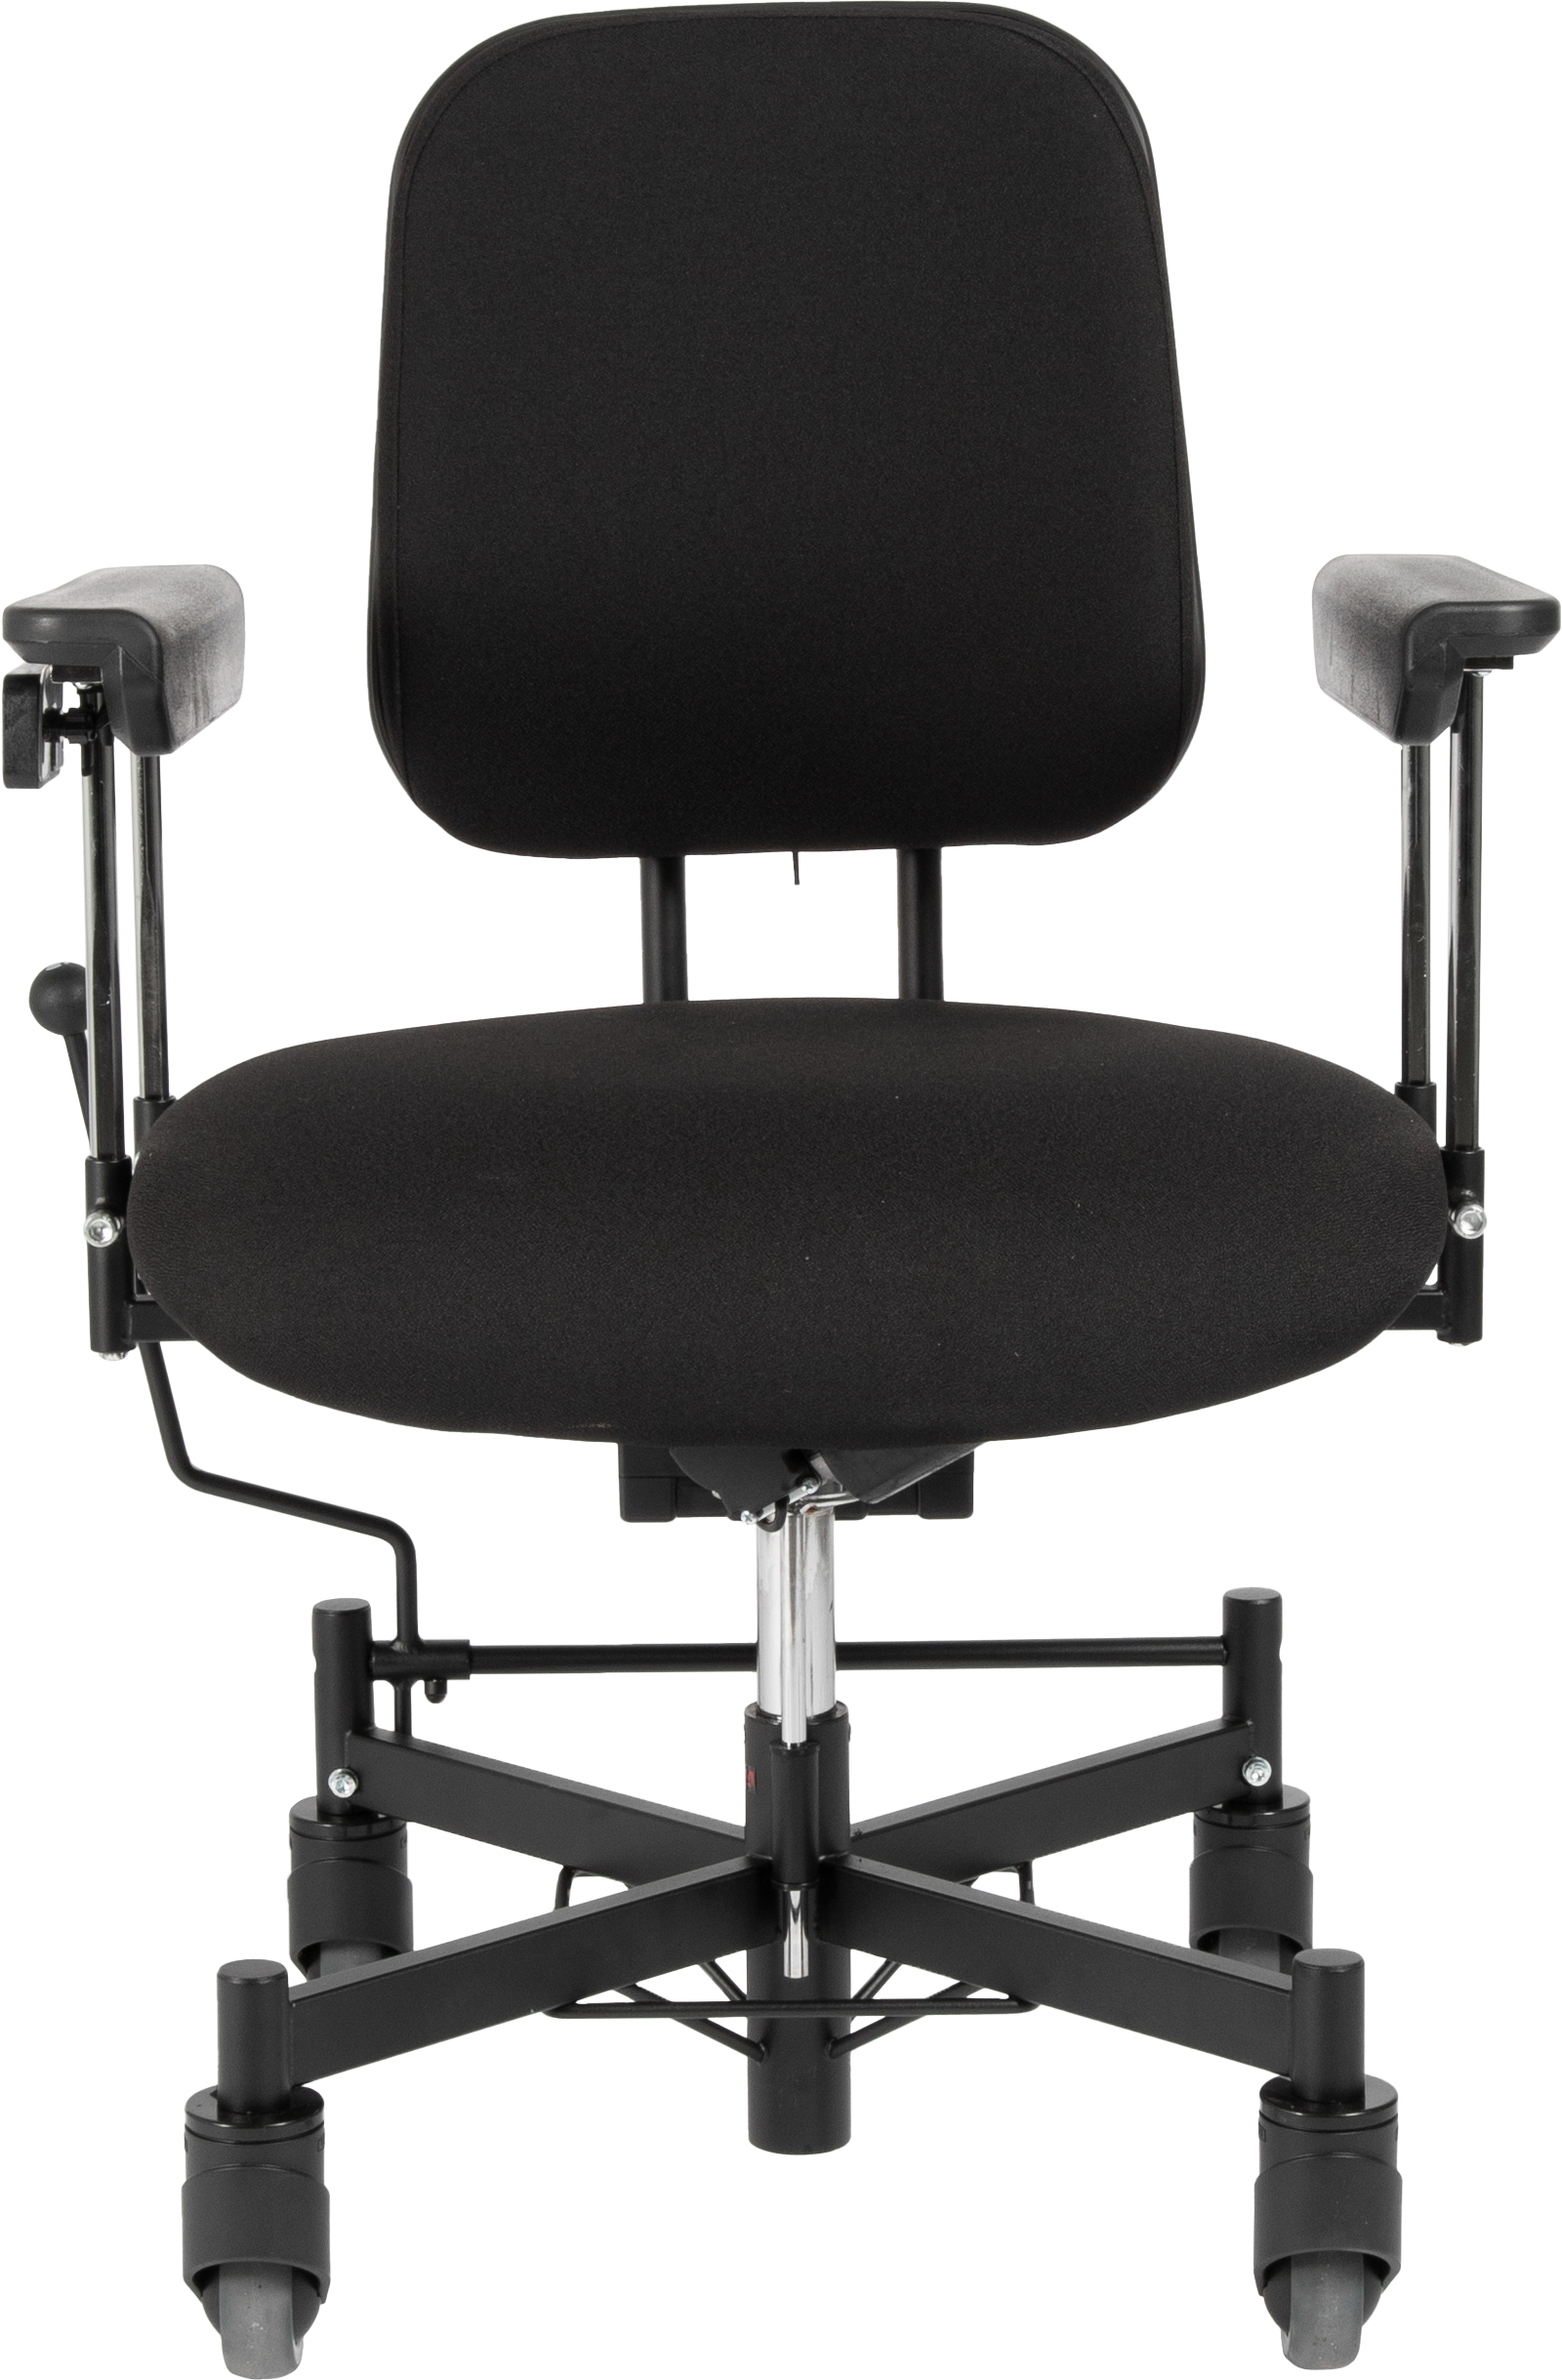 Vela 300 bariatric chair front view in black.